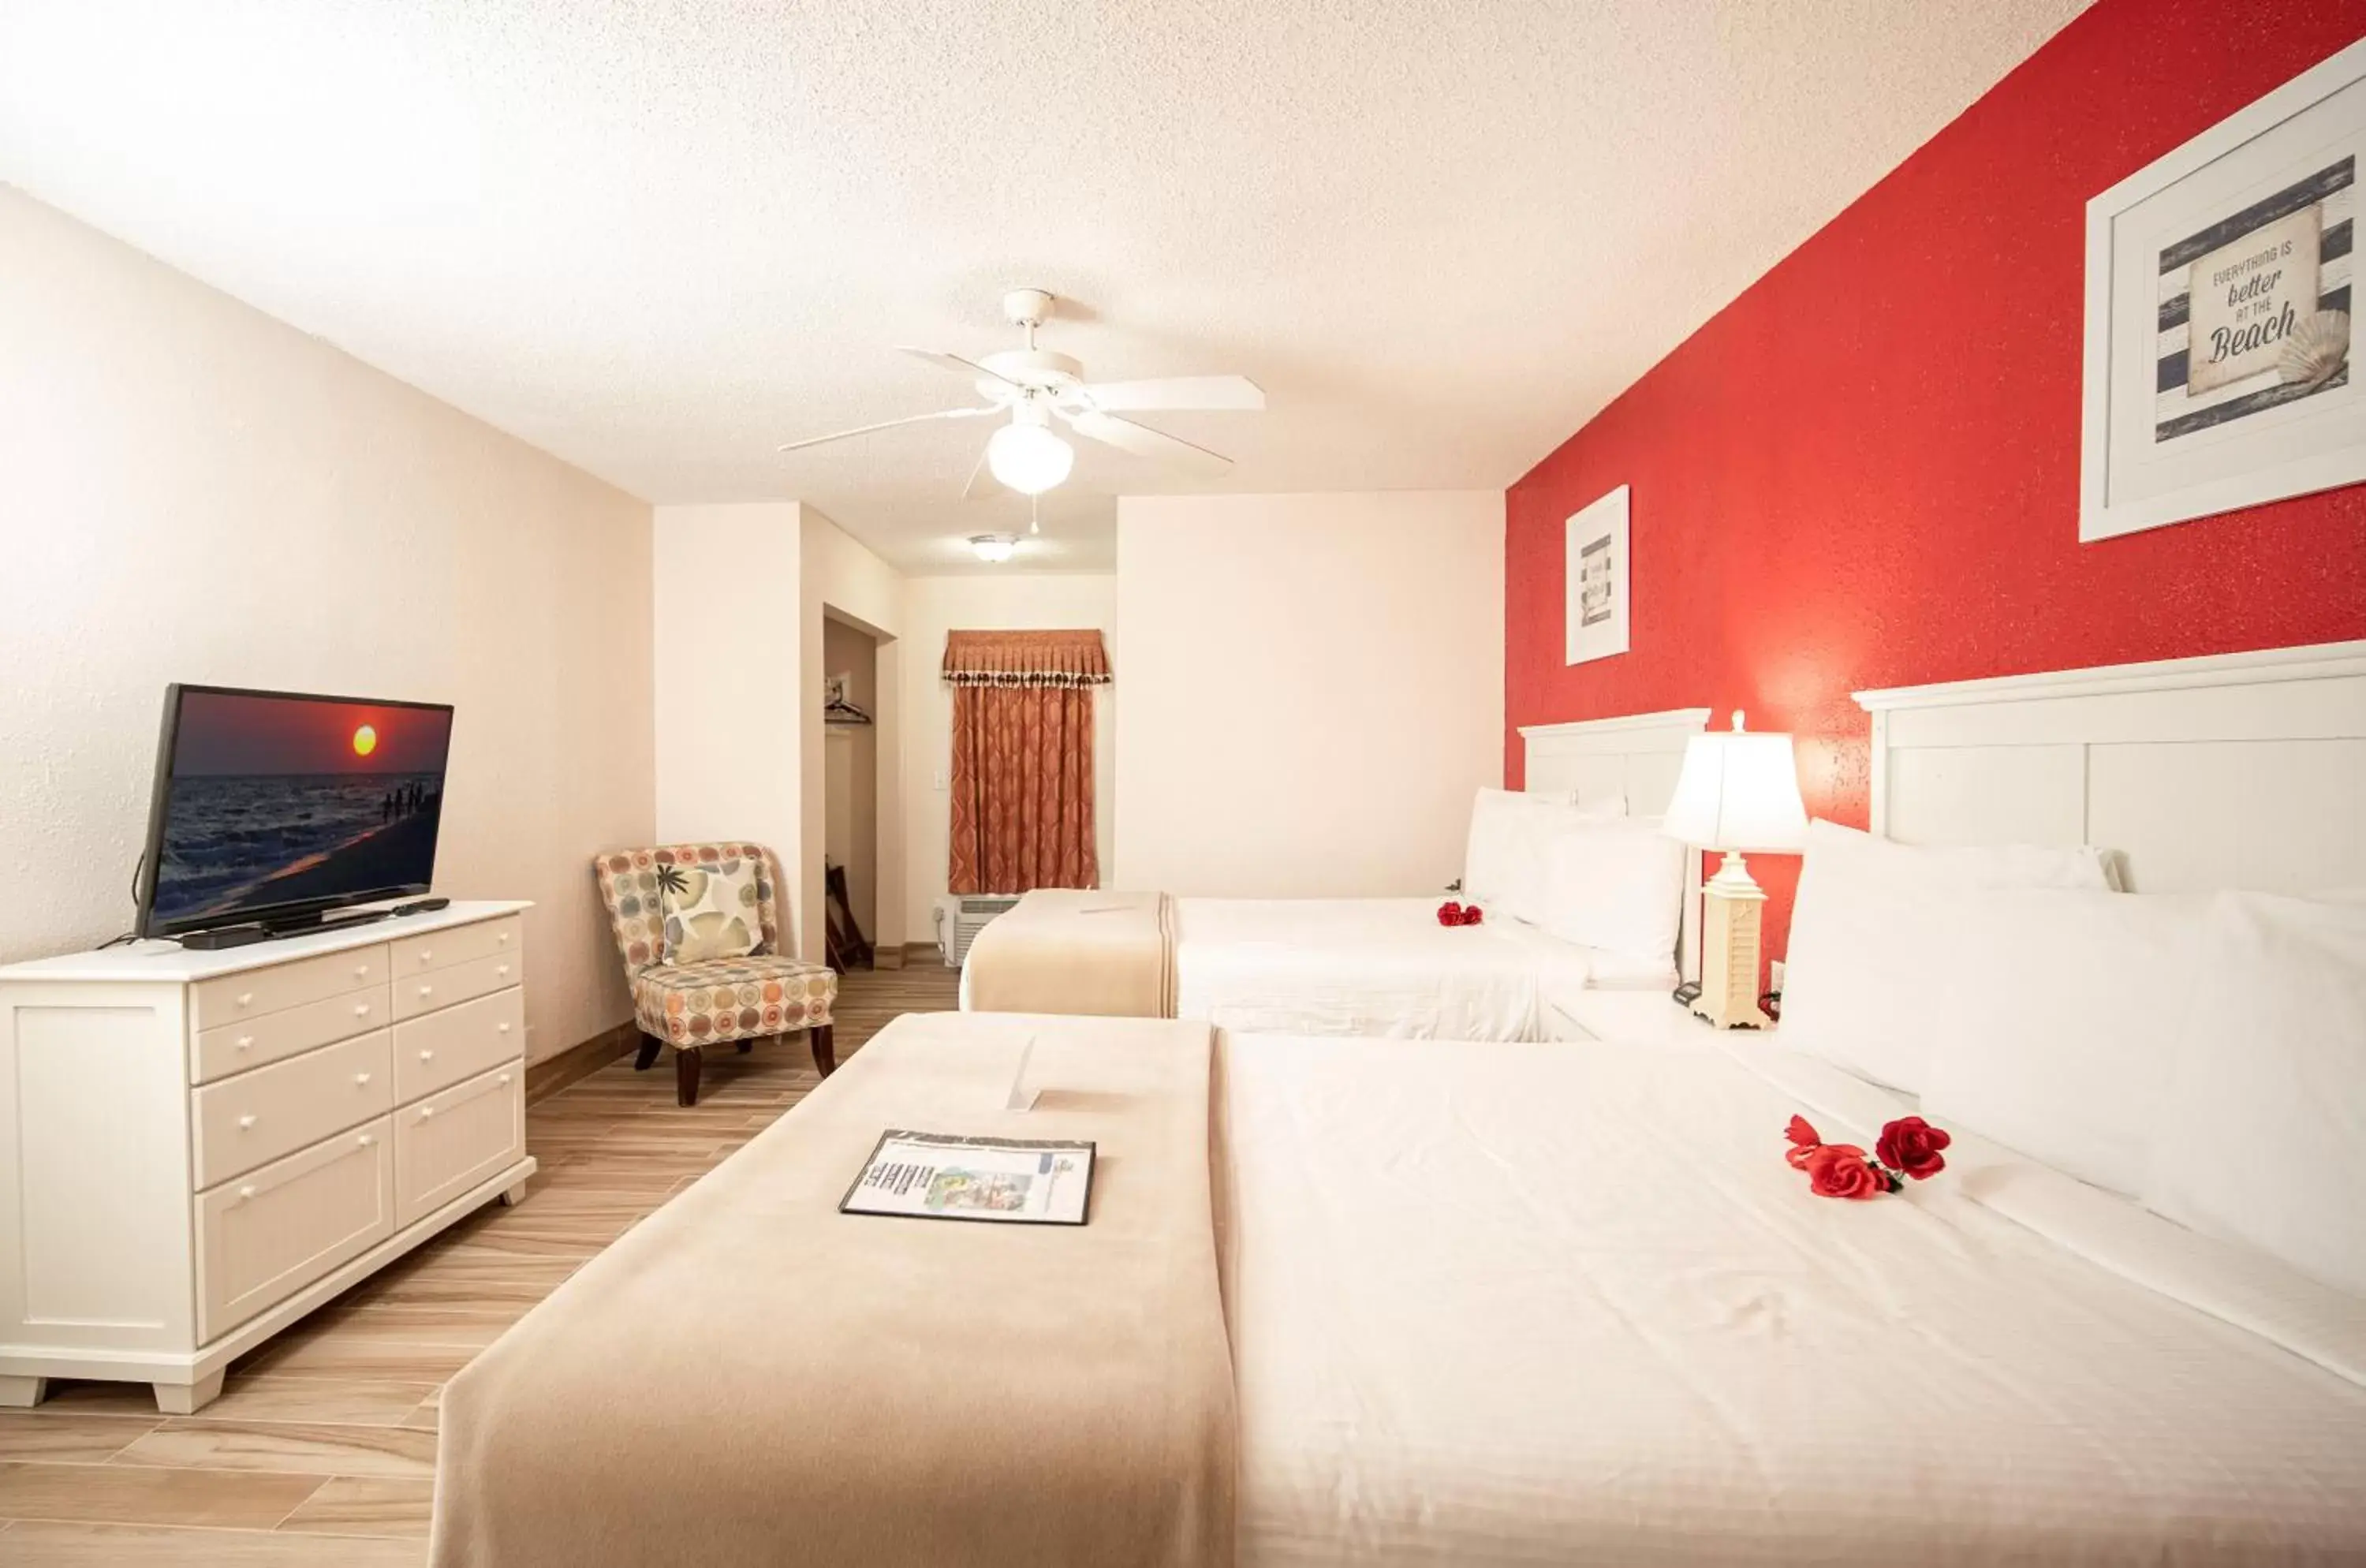 Photo of the whole room in Island Sun Inn & Suites - Venice, Florida Historic Downtown & Beach Getaway